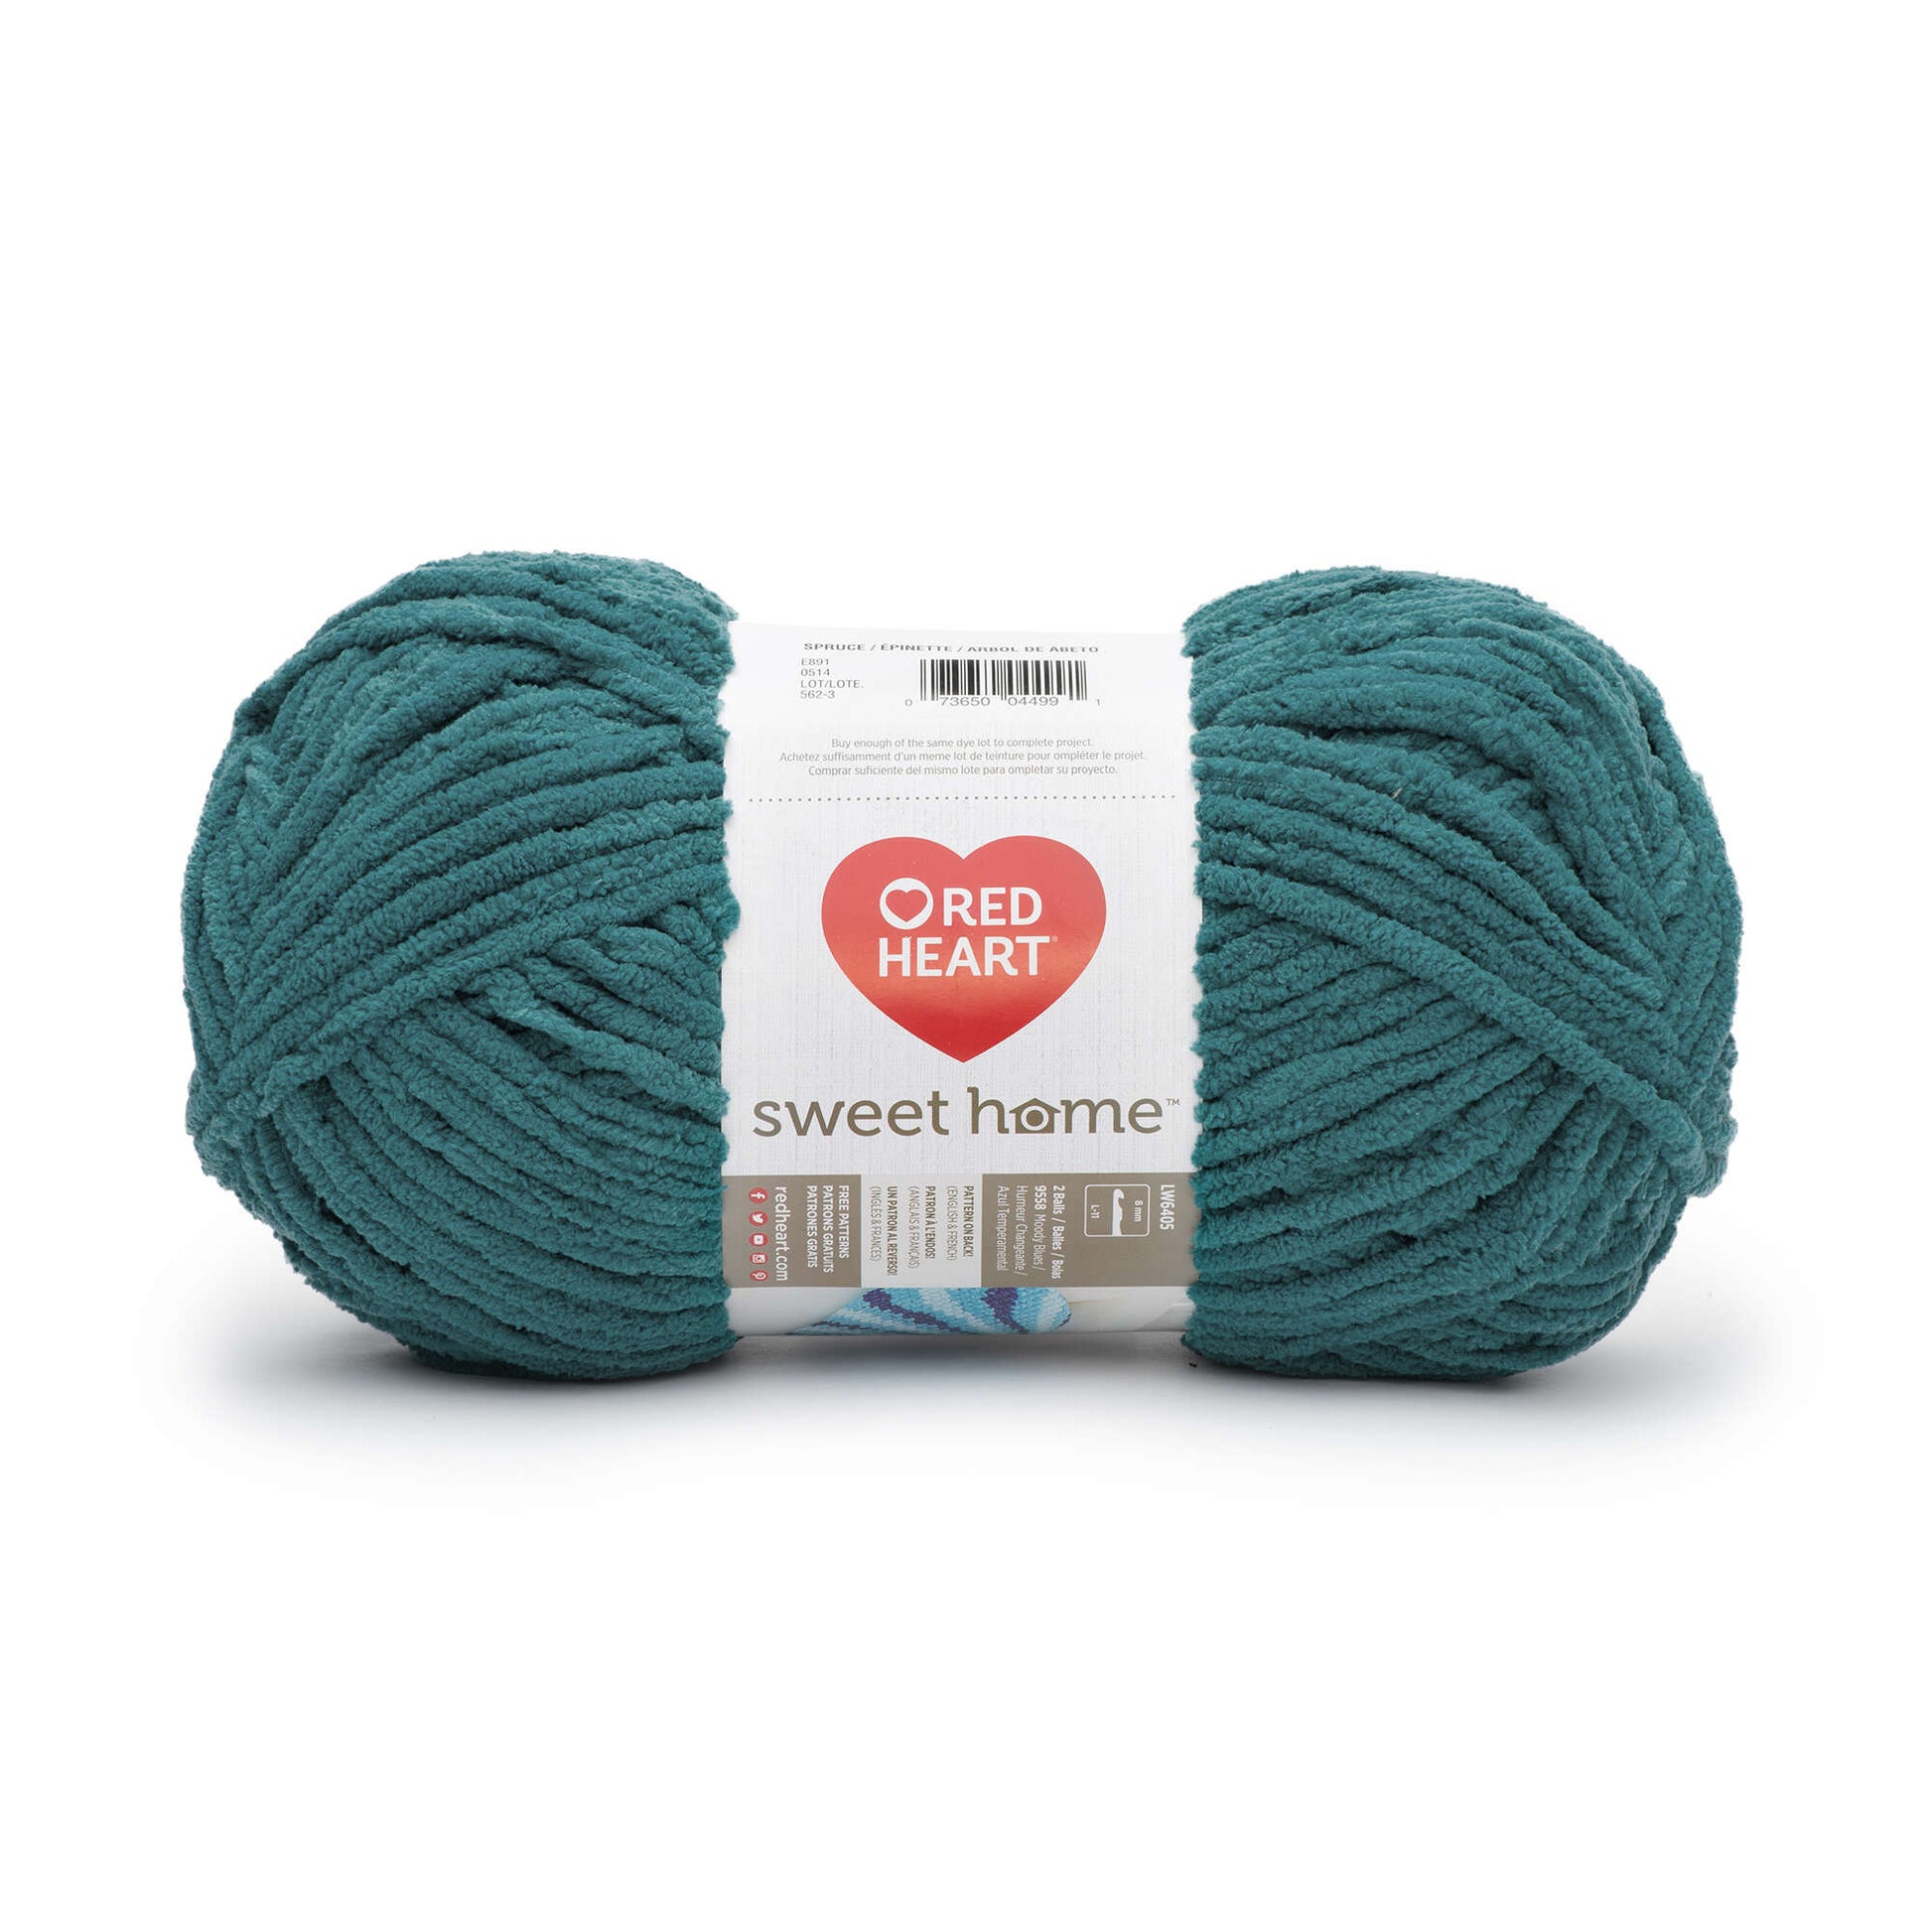 Red Heart Sweet Home Yarn - Clearance shades Spruce